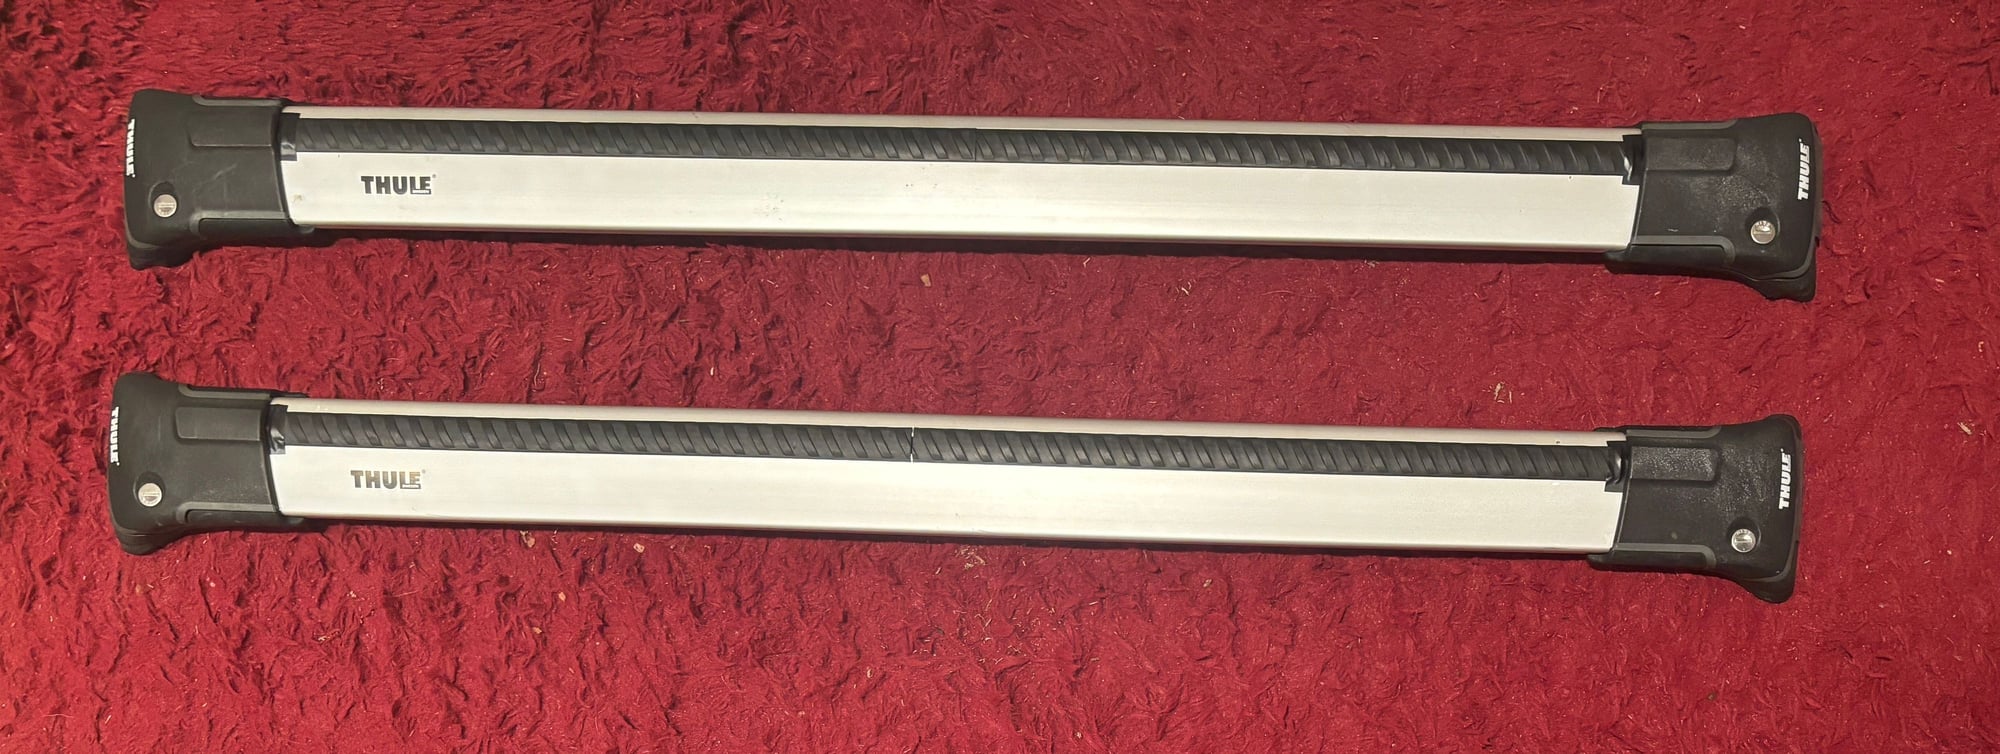 Accessories - Thule (7503) Low Profile Crossbars (Fitment: X166 GL and W212 E-class Wagon) - Used - All Years  All Models - All Years  All Models - La / Oc, CA 91792, United States